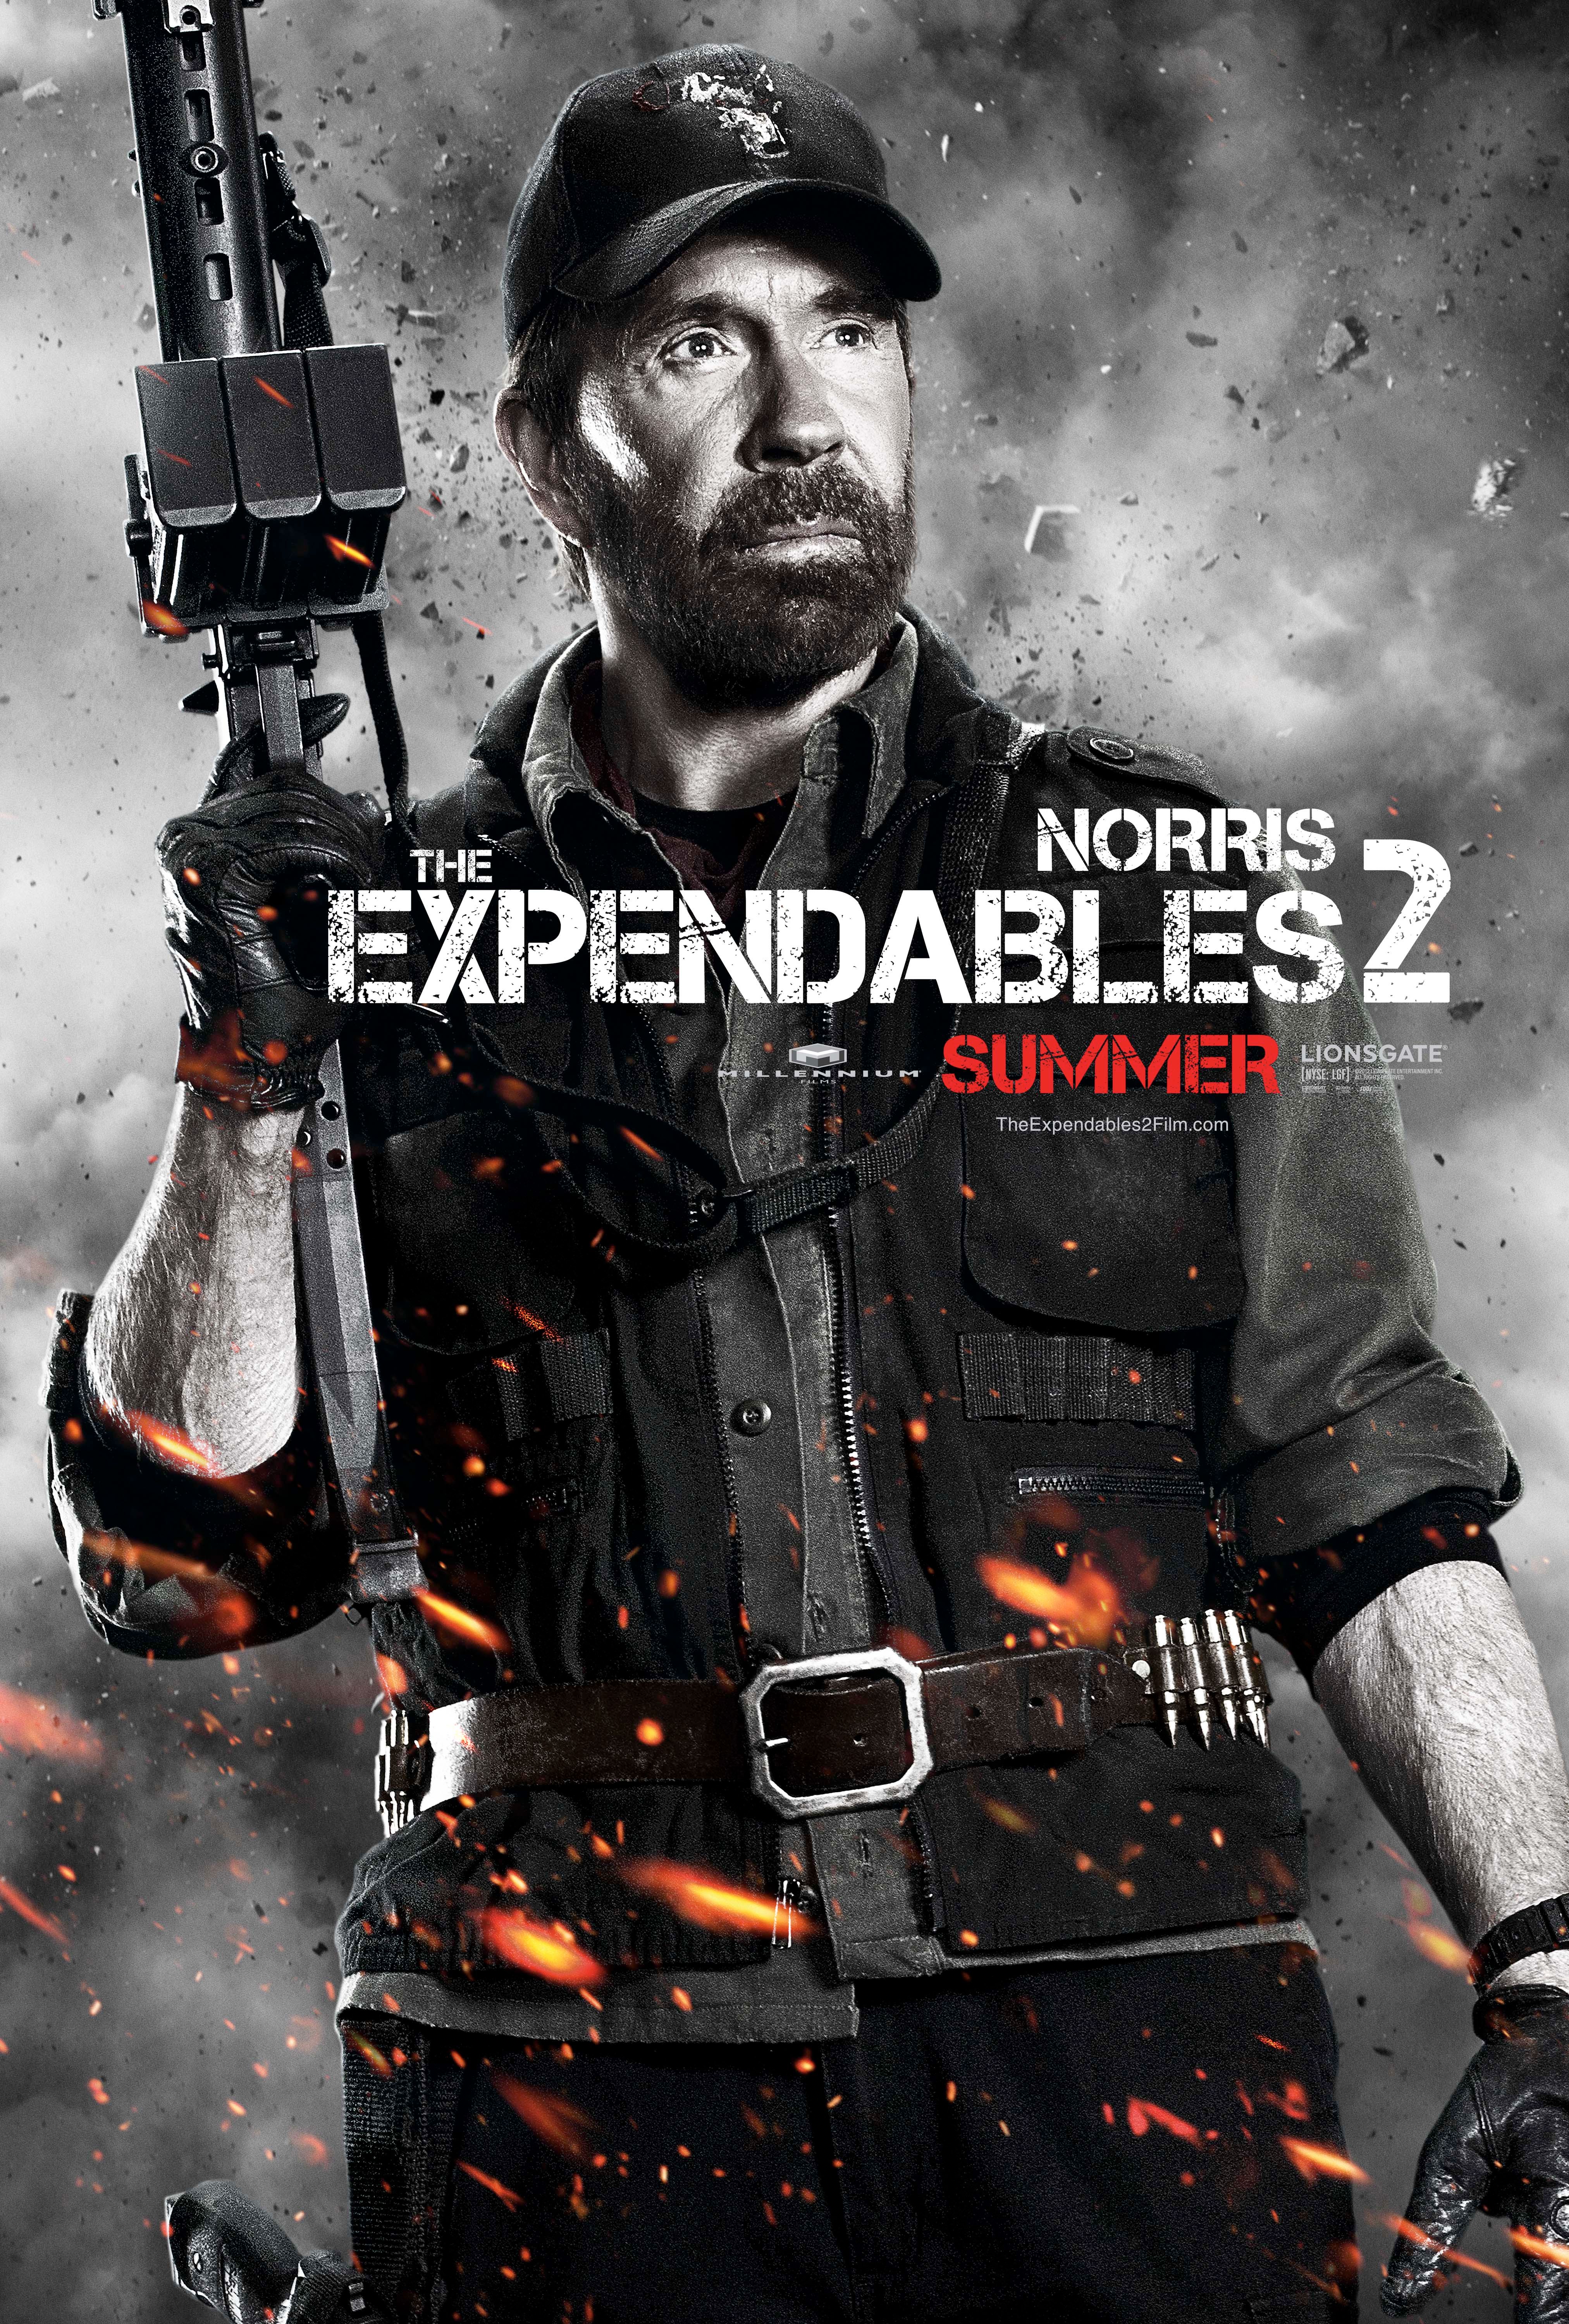 The Expendables 2 Character Poser #10